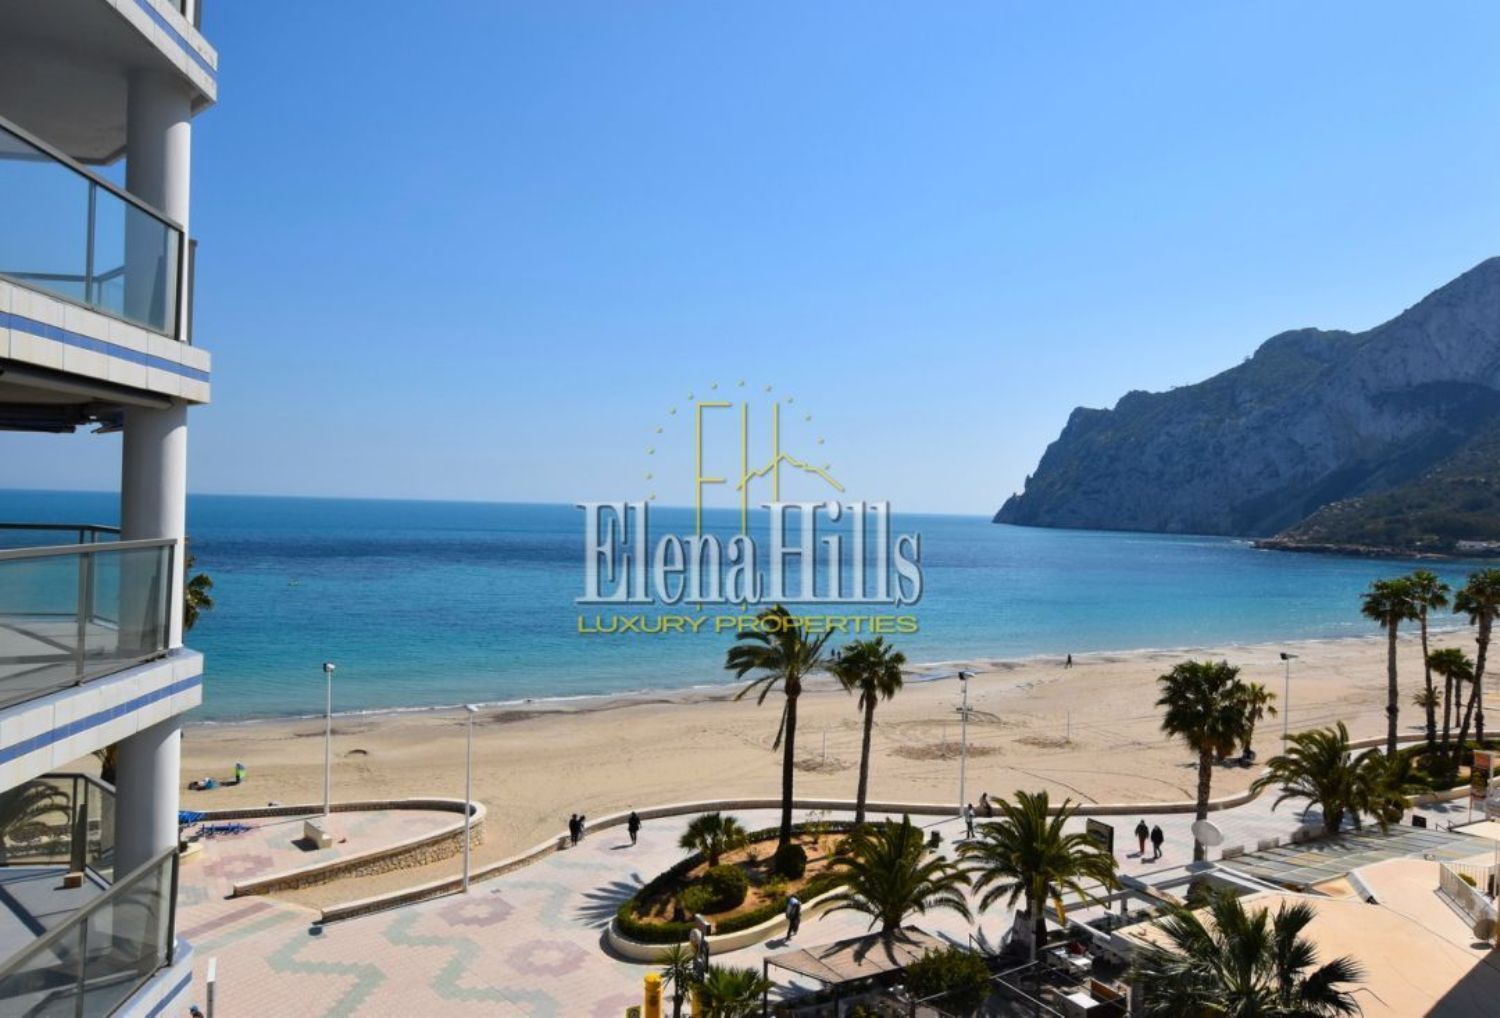 Apartment for sale on the seafront on Levante street, in Calpe